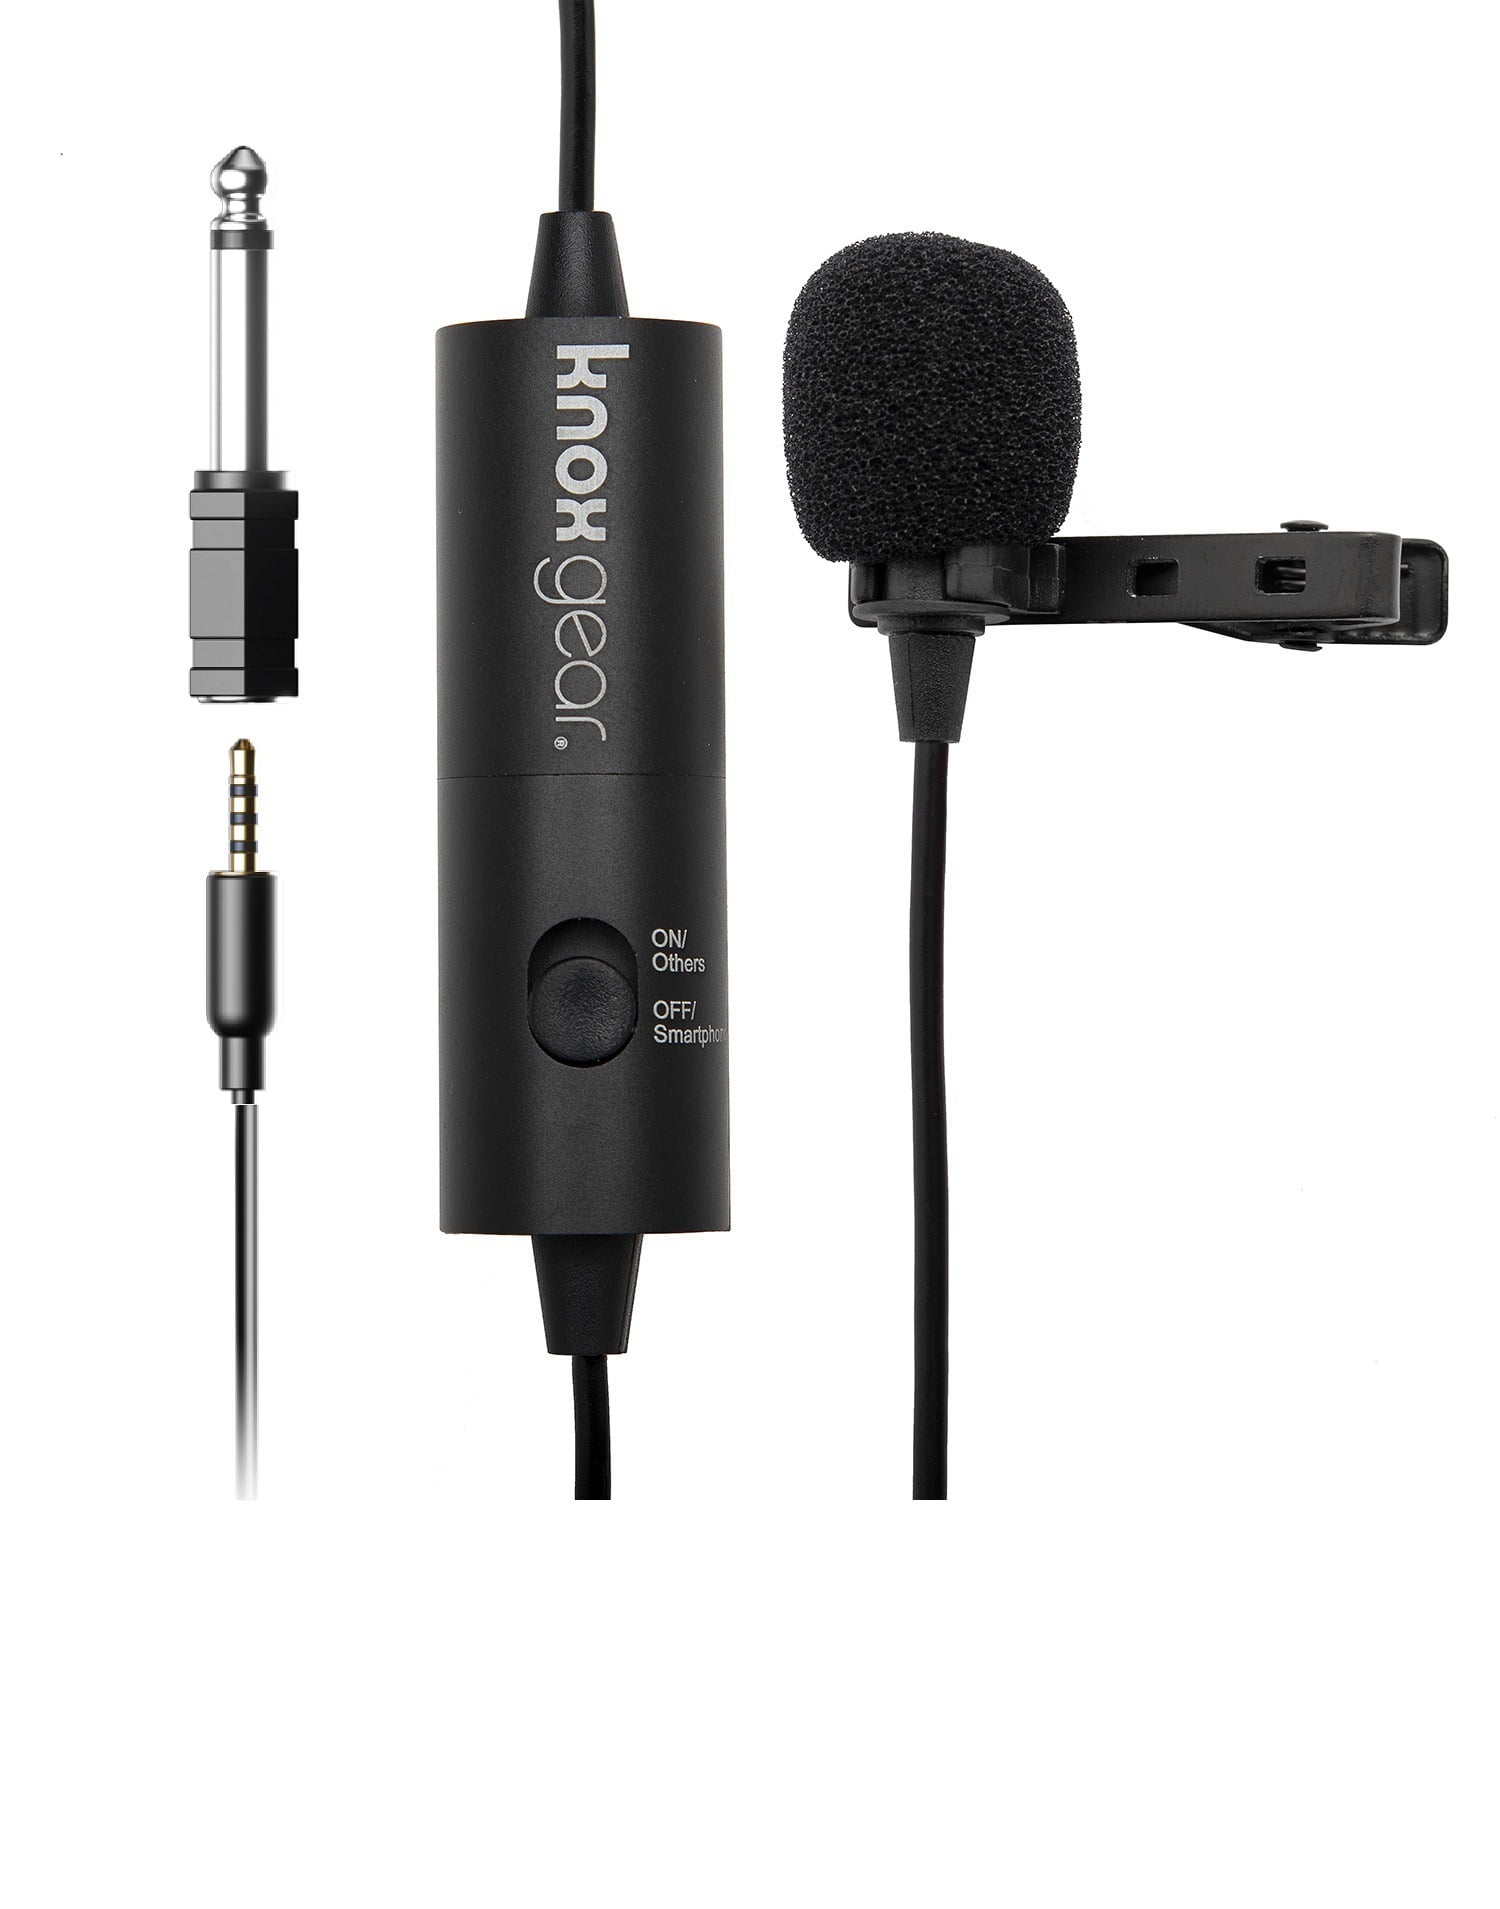 Movo LV-M5 Discreet Pin Lavalier Omnidirectional Microphone with 3.5mm TRS Connector - for Dslr Cameras, Camcorders, Recorders